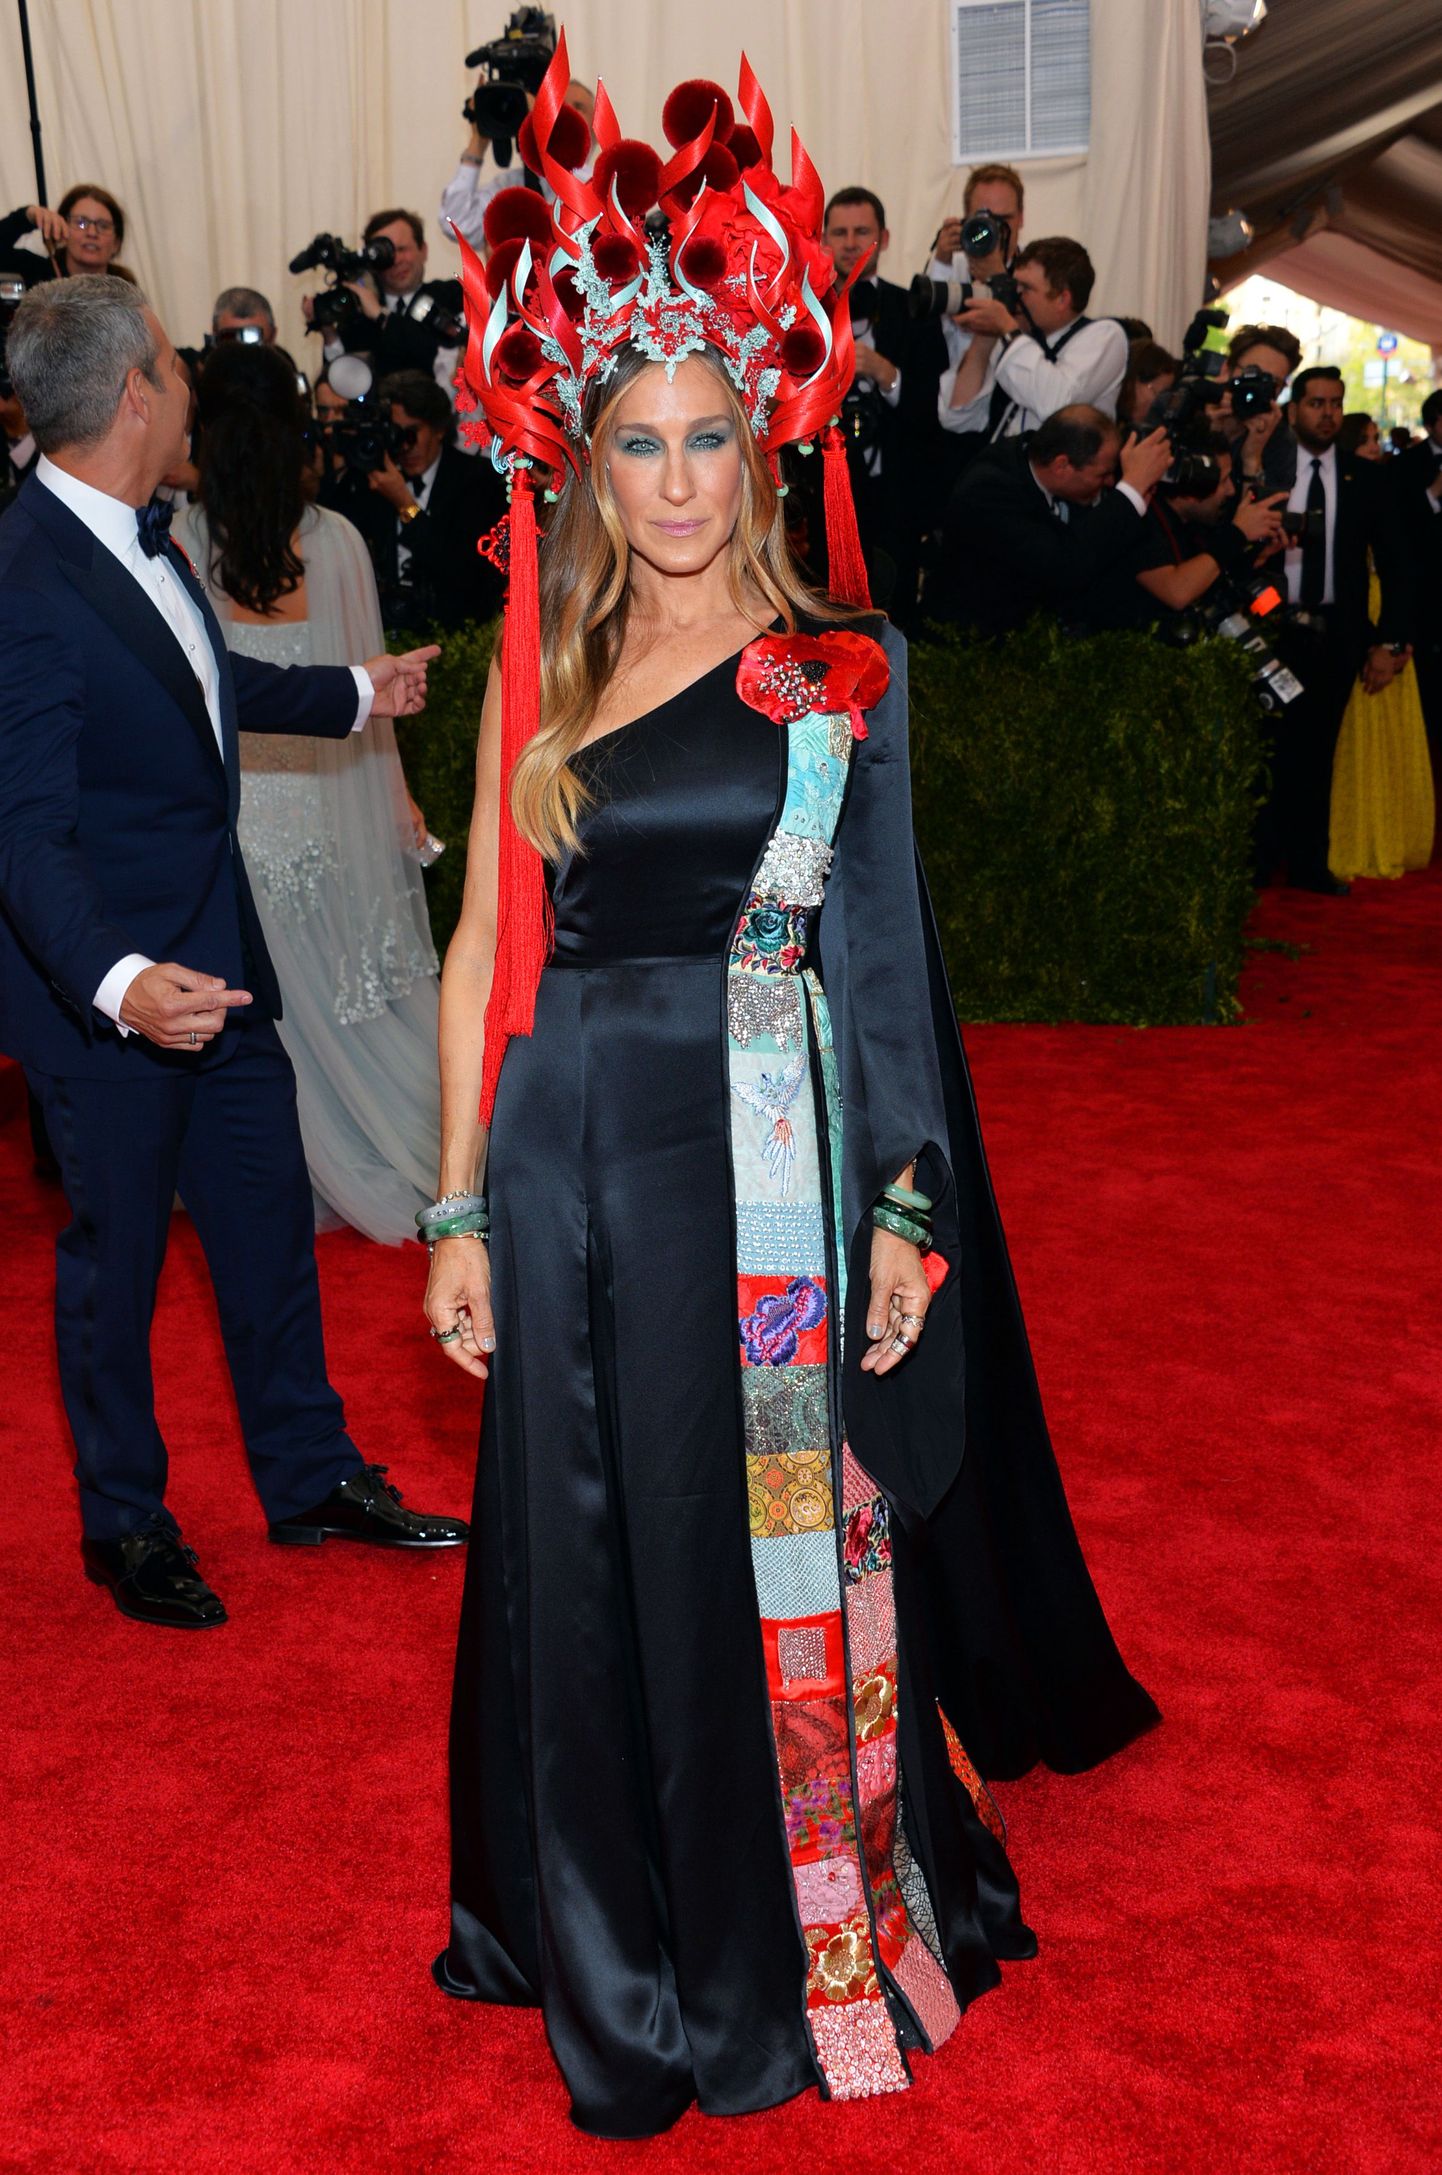 Sarah Jessica Parker arrives at The Metropolitan Museum of Art's Costume Institute benefit gala celebrating "China: Through the Looking Glass" on Monday, May 4, 2015, in New York. (Photo by Evan Agostini/Invision/AP)